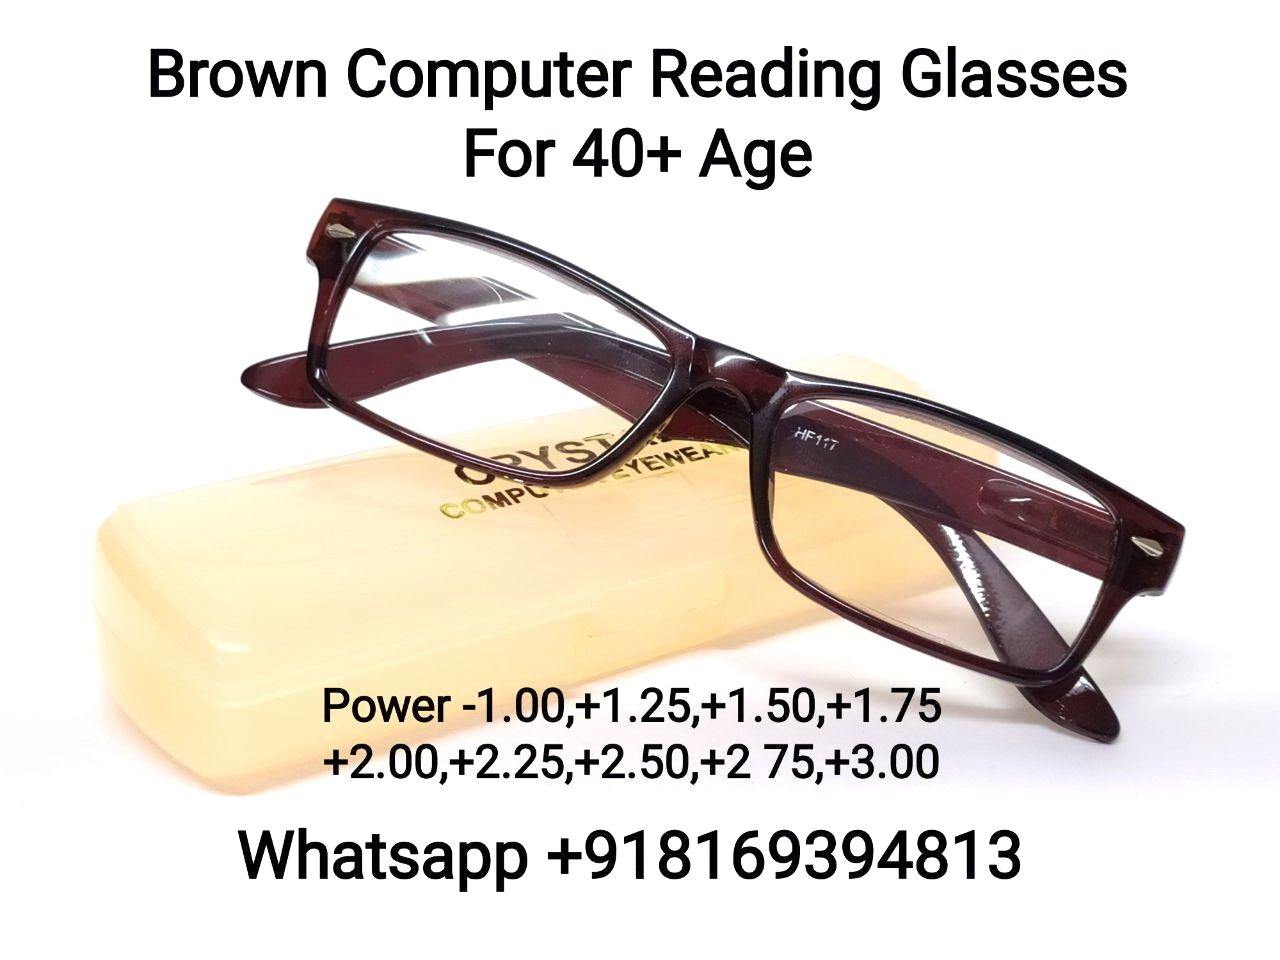 Brown Computer Reading Glasses for Men and Women